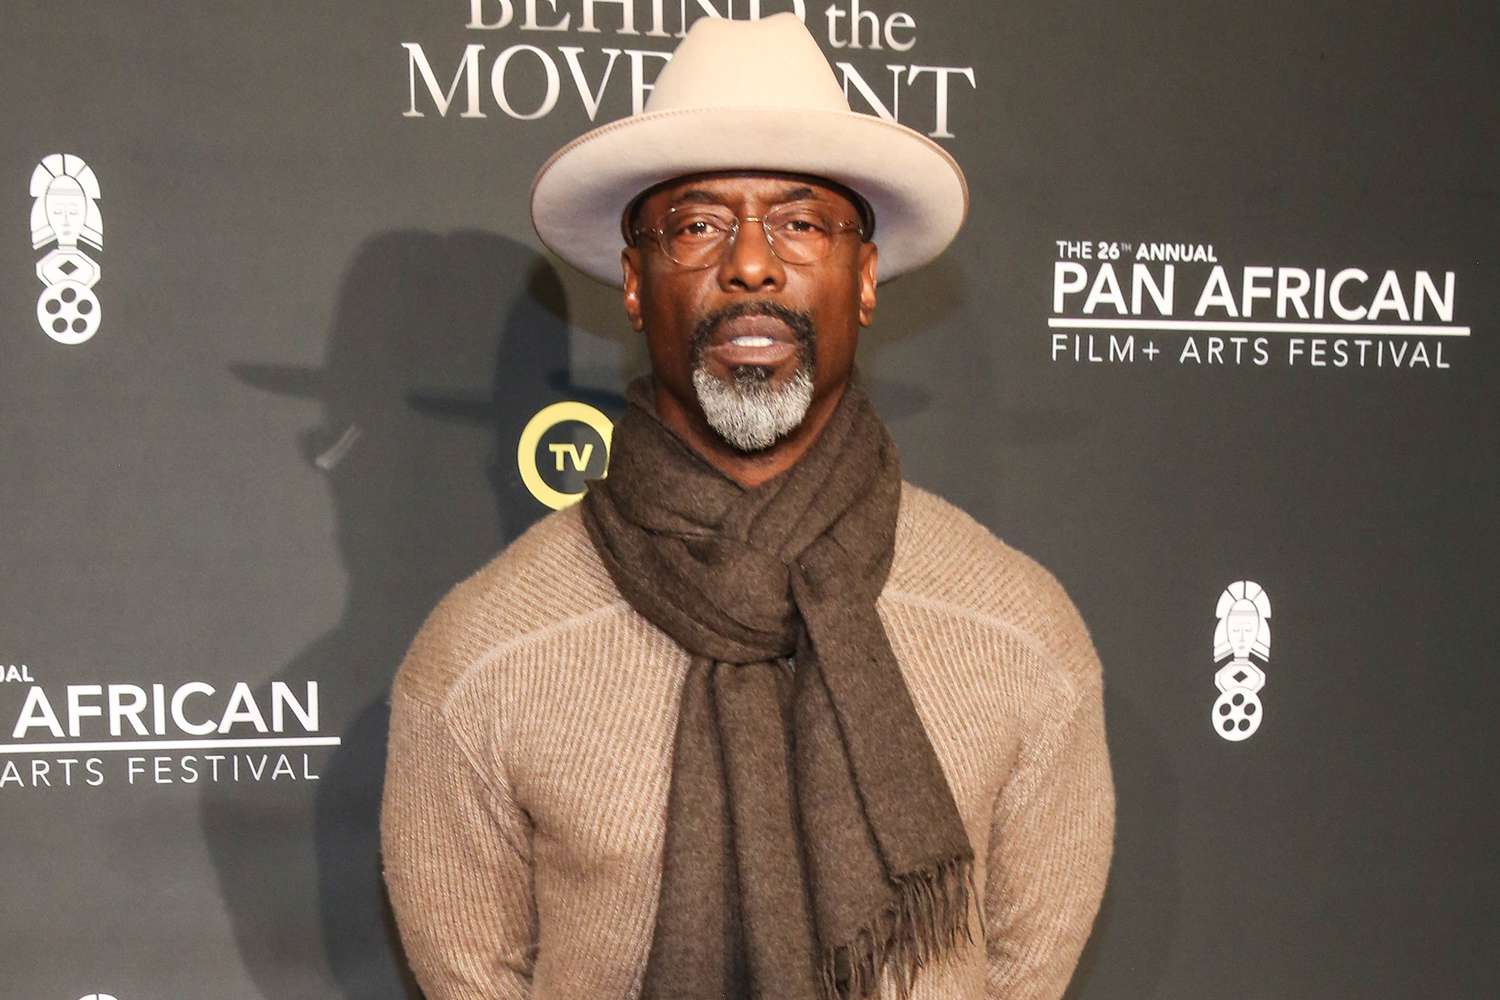 Isaiah Washington attends "Behind The Movement" Red Carpet Event at Cinemark Baldwin Hills Crenshaw Plaza 15 on February 9, 2018 in Los Angeles, California.